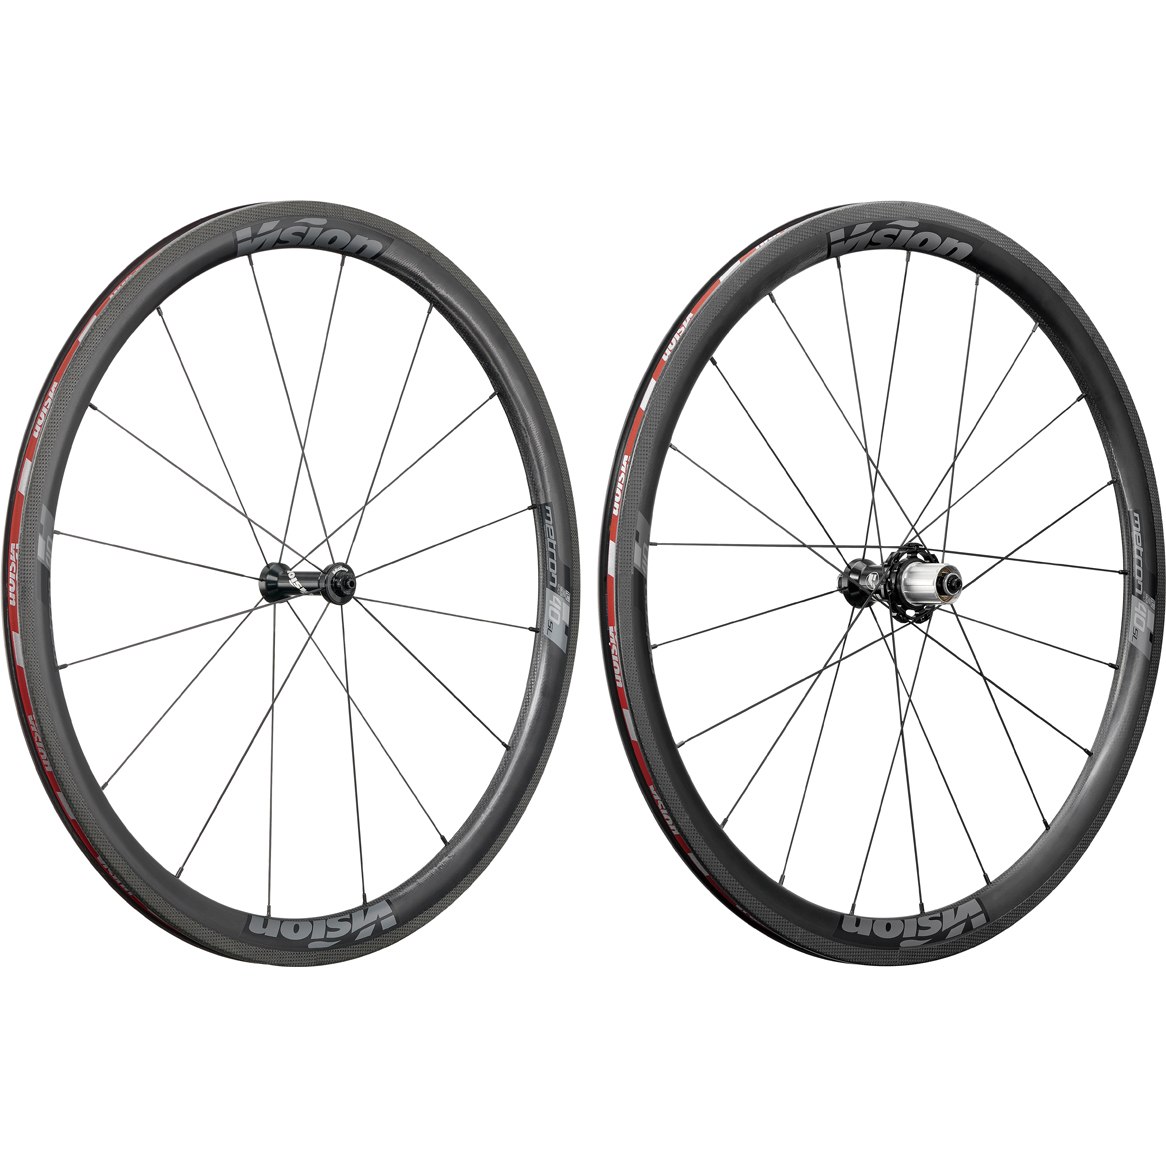 Picture of Vision Metron 40 SL Carbon Wheelset - Tubeless Ready - Clincher - Shimano HG